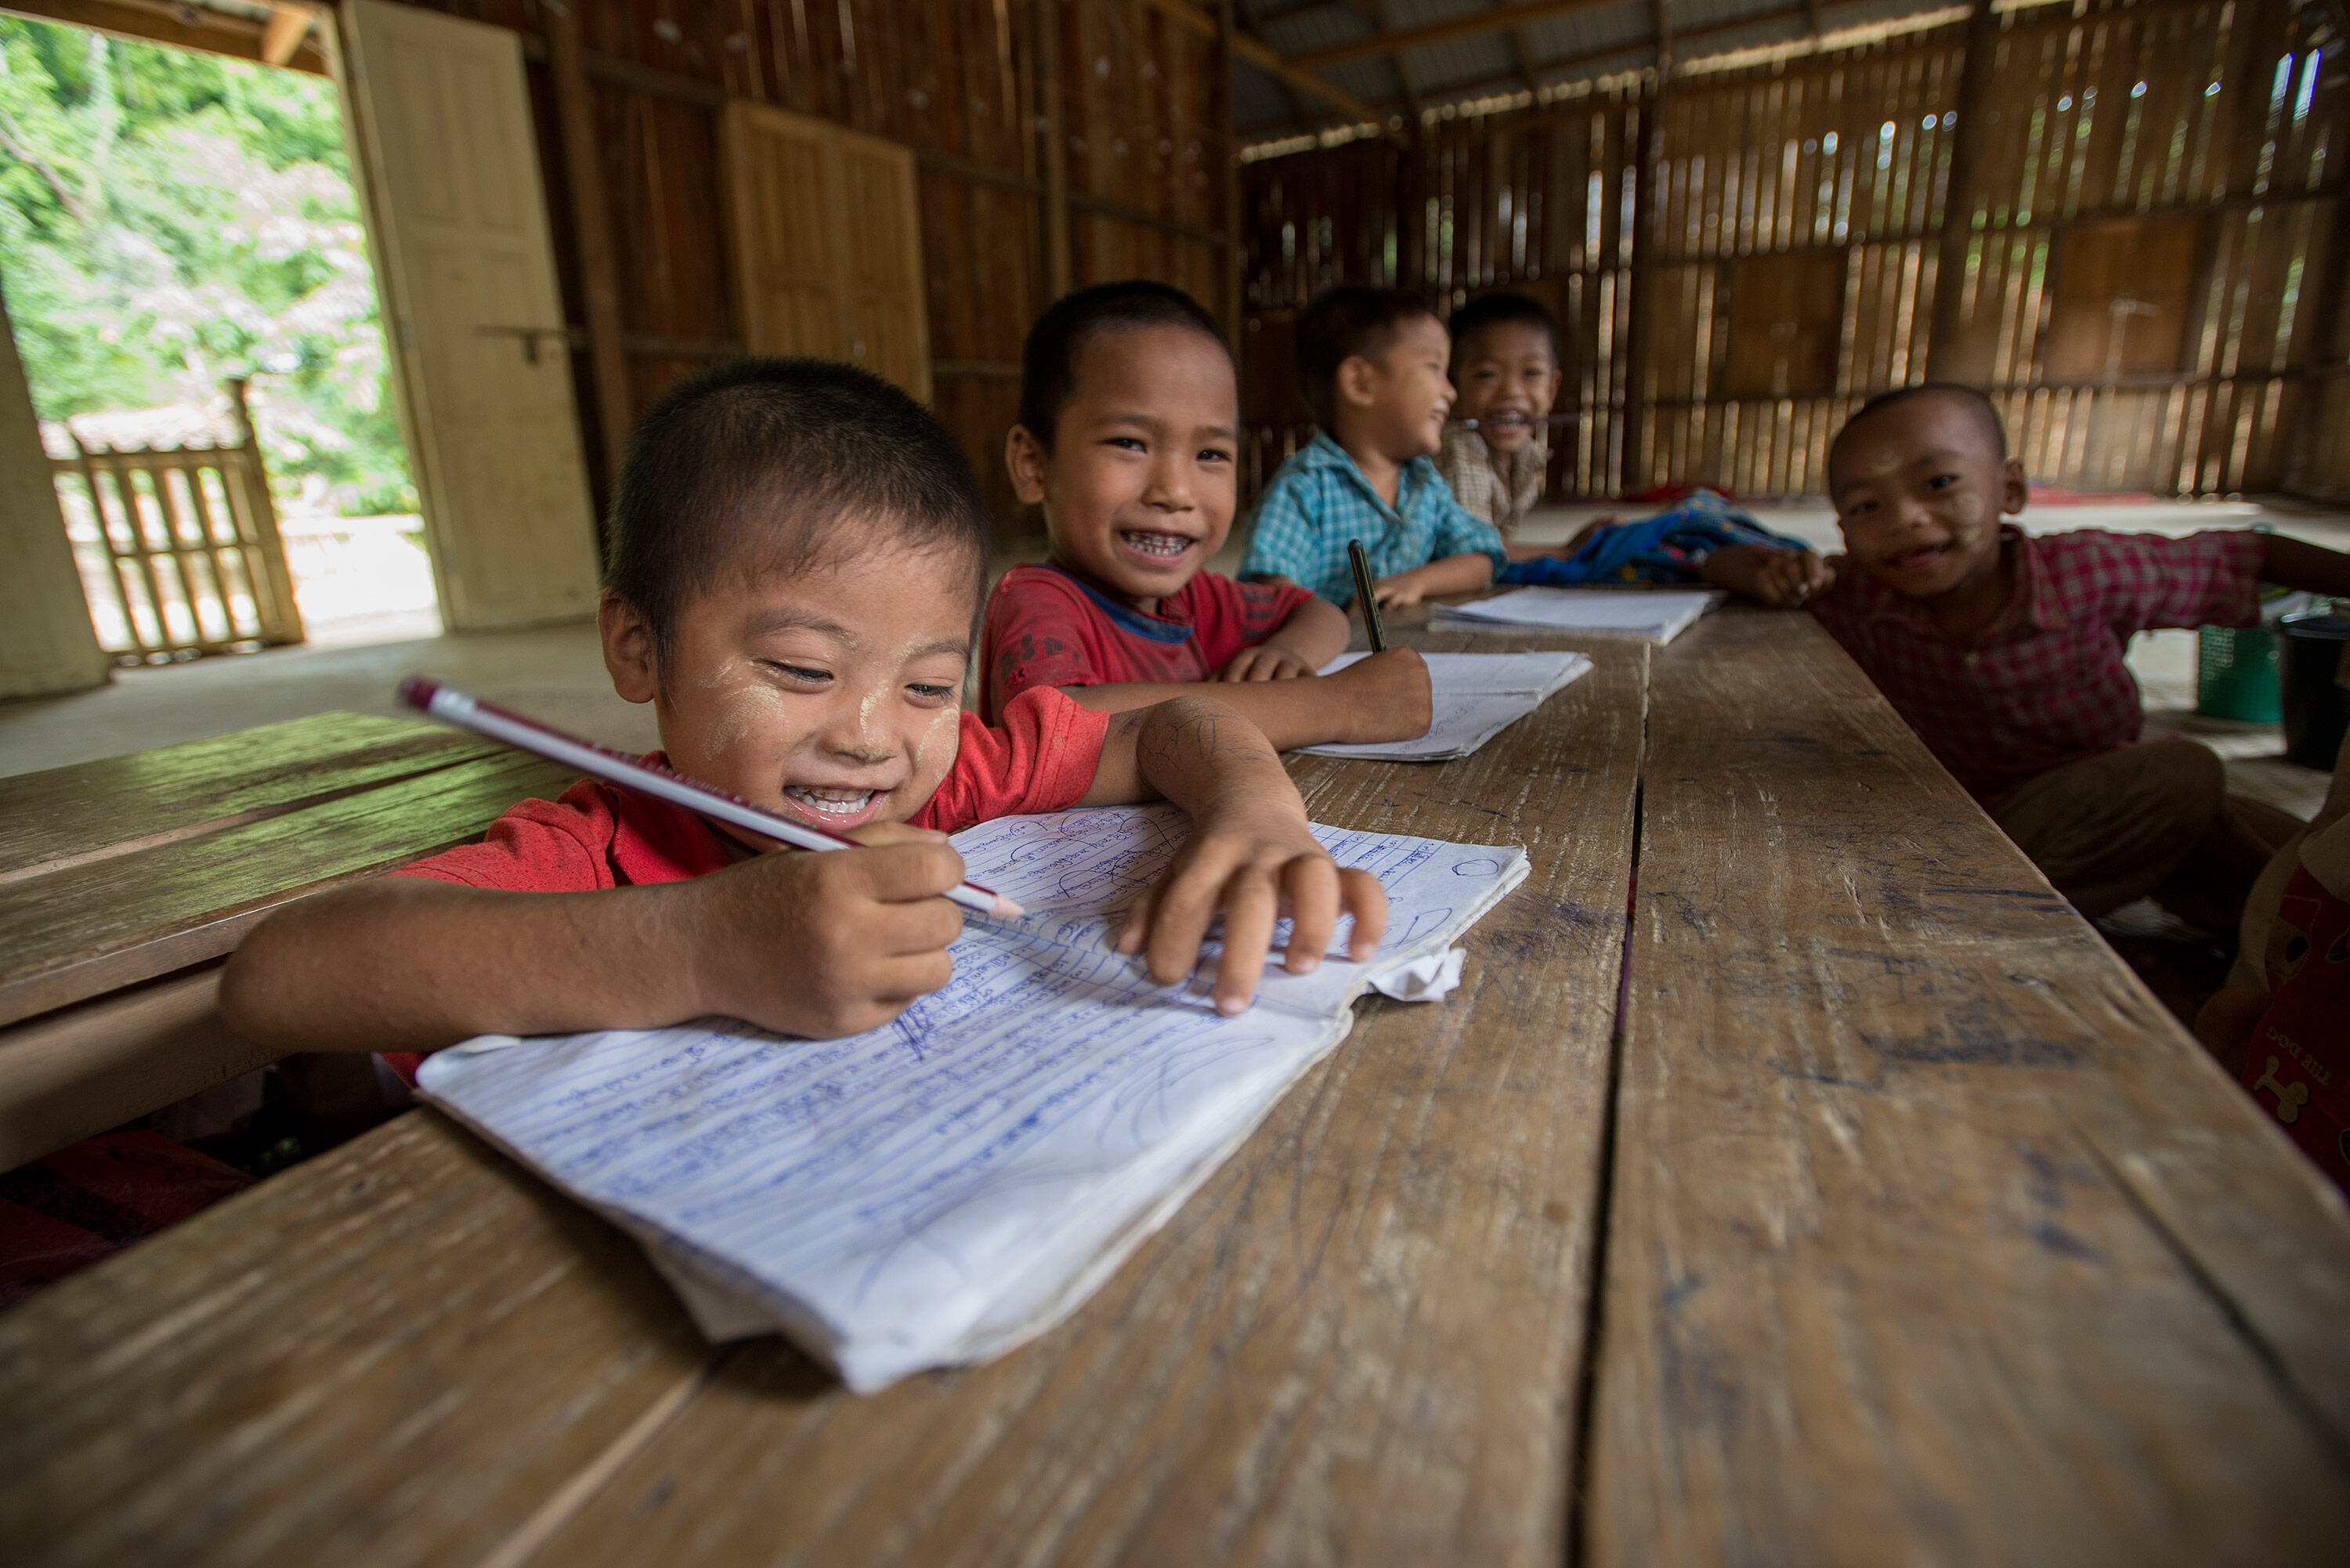 Smiling young boys in Myanmar write in their notebooks at a wooden table in tehir bamboo classroom.